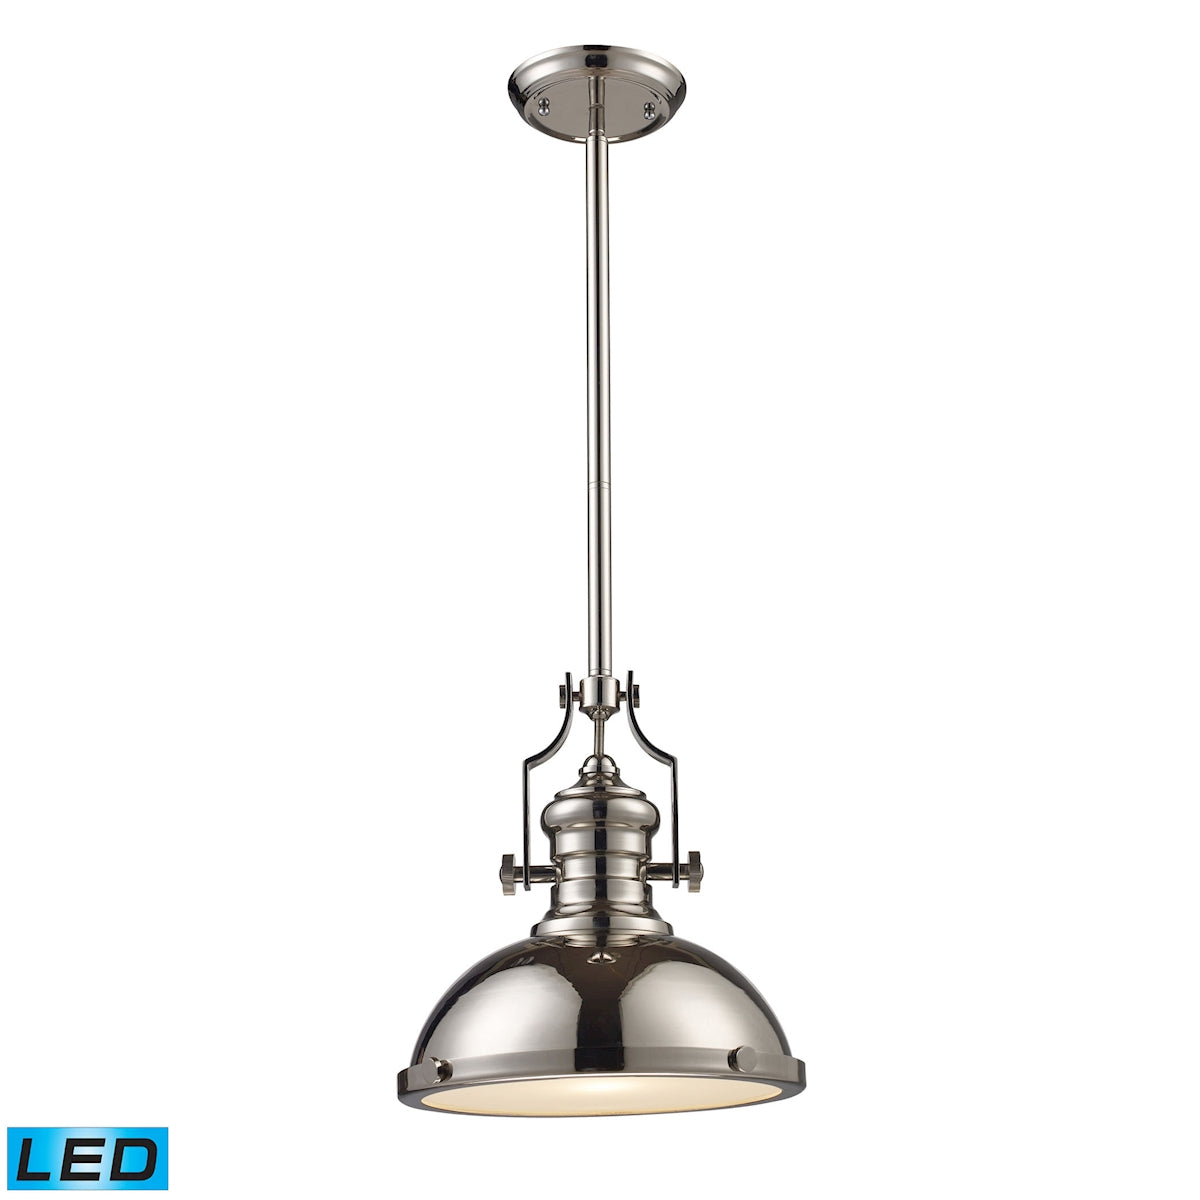 ELK Lighting 66114-1-LED Chadwick 1-Light Pendant in Polished Nickel with Matching Shade - Includes LED Bulb